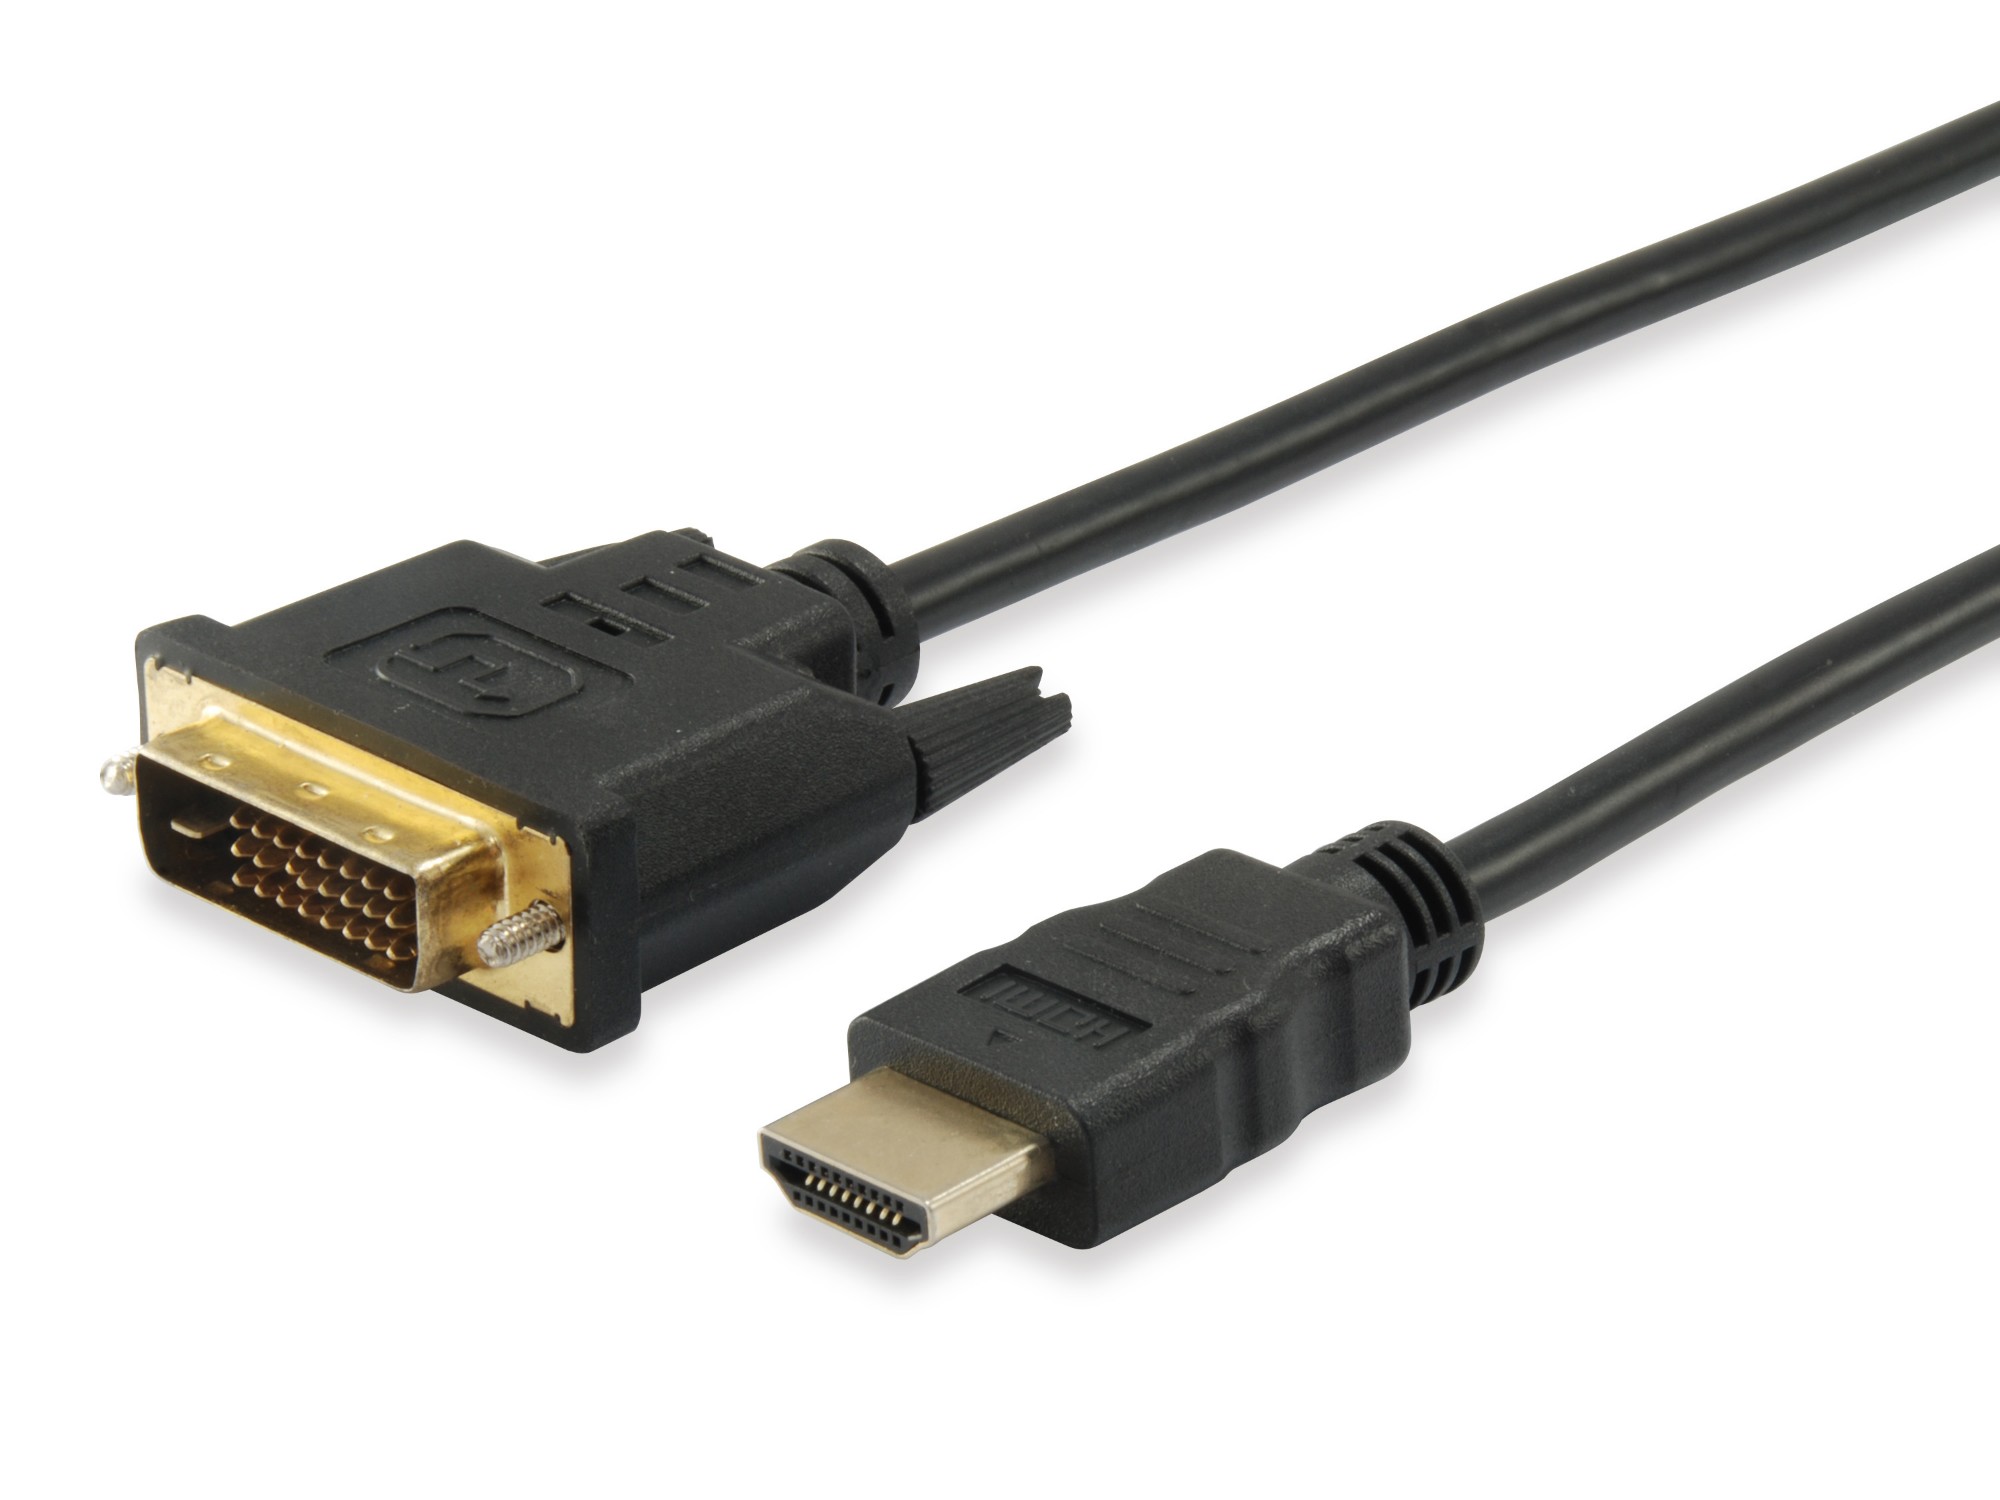 Photos - Cable (video, audio, USB) Equip HDMI to DVI-D Single Link Cable, 3m 119323 